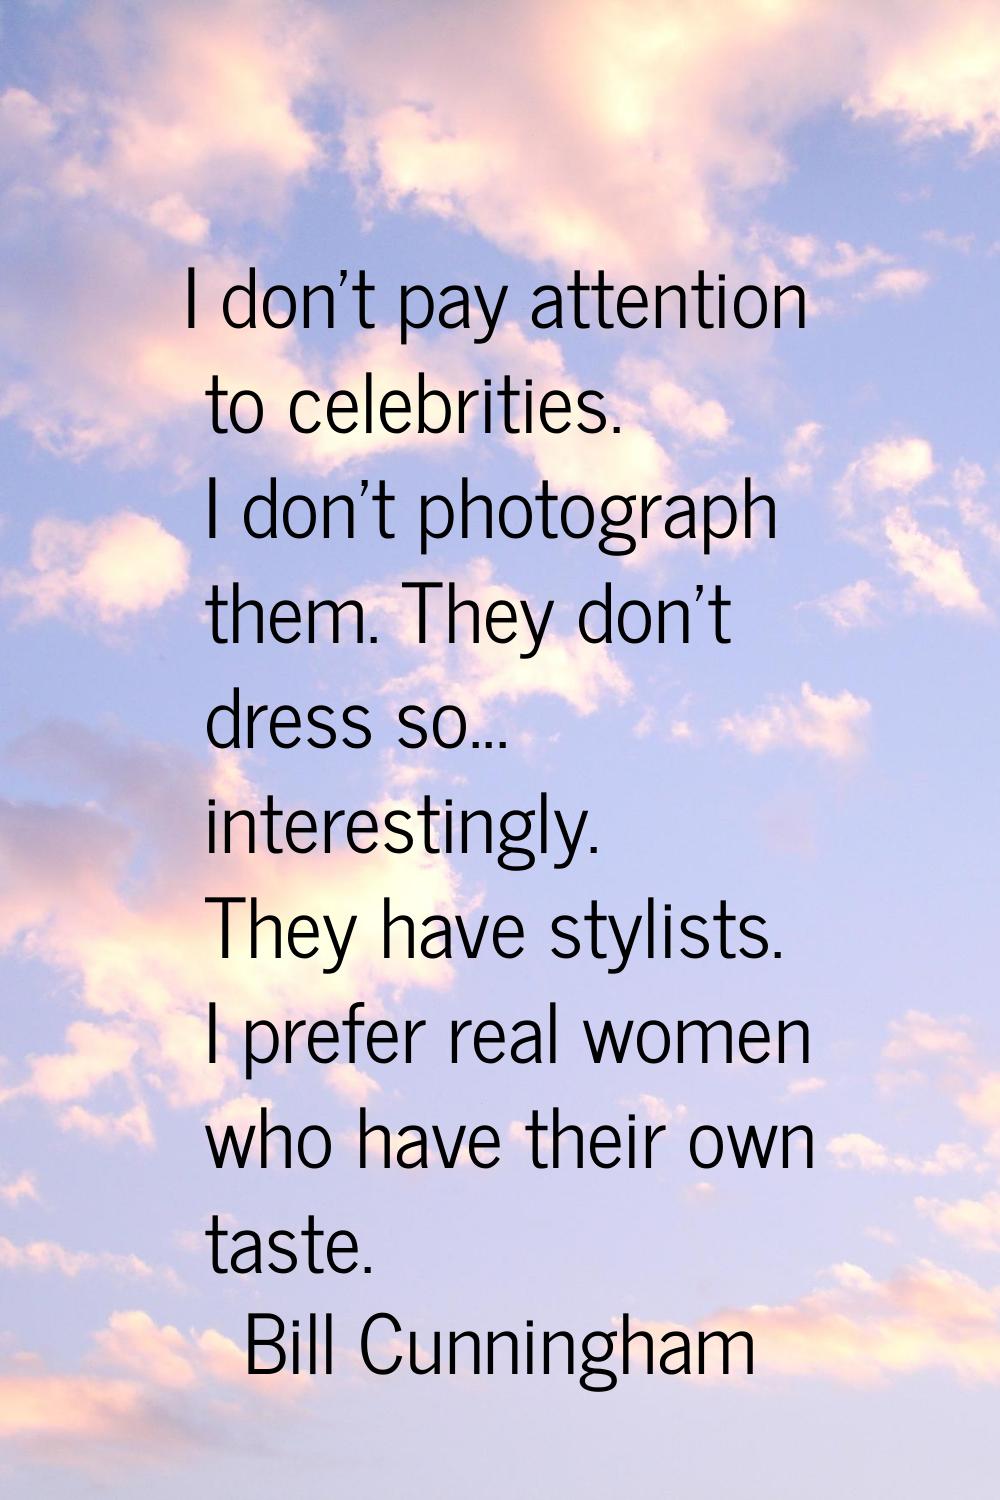 I don't pay attention to celebrities. I don't photograph them. They don't dress so... interestingly